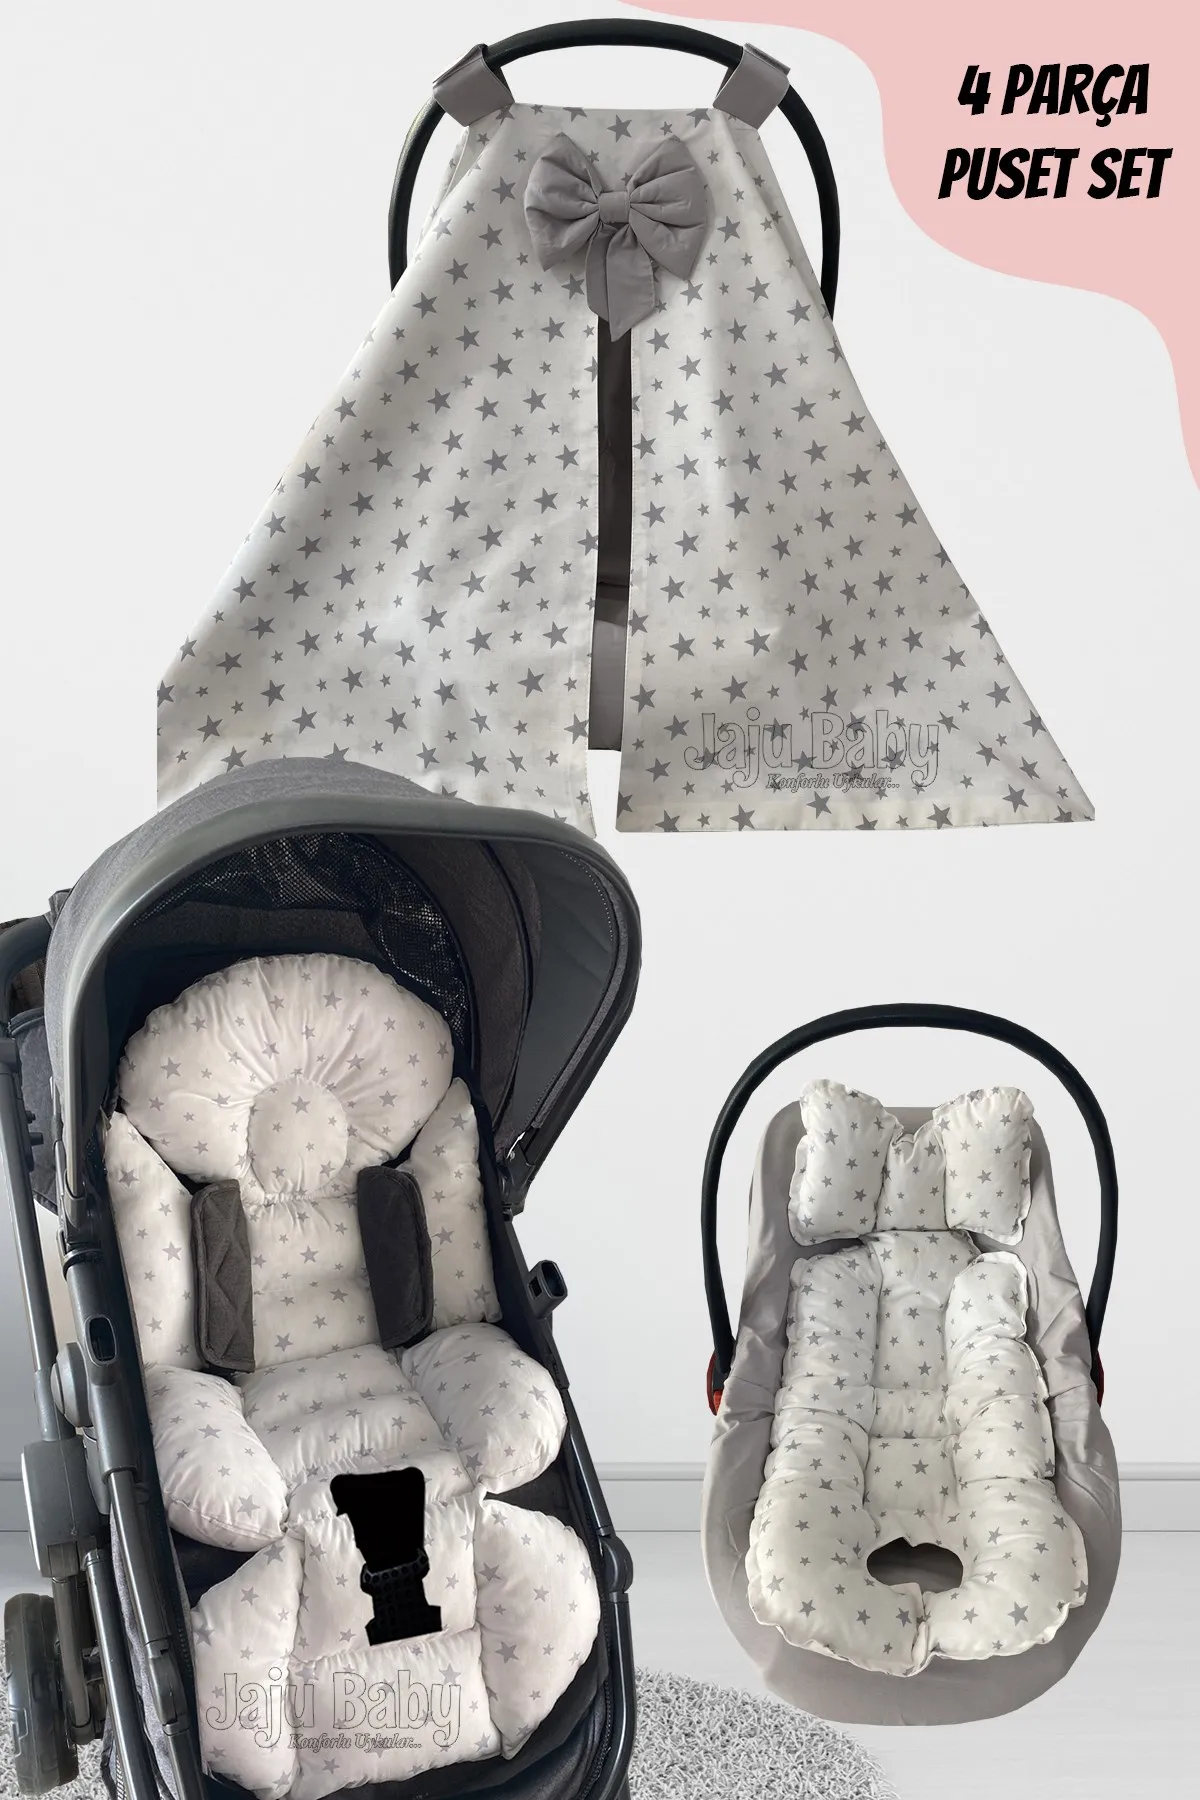 Jaju Baby Handmade, Gray Star Patterned 4-Piece Stroller Set (With Handle)